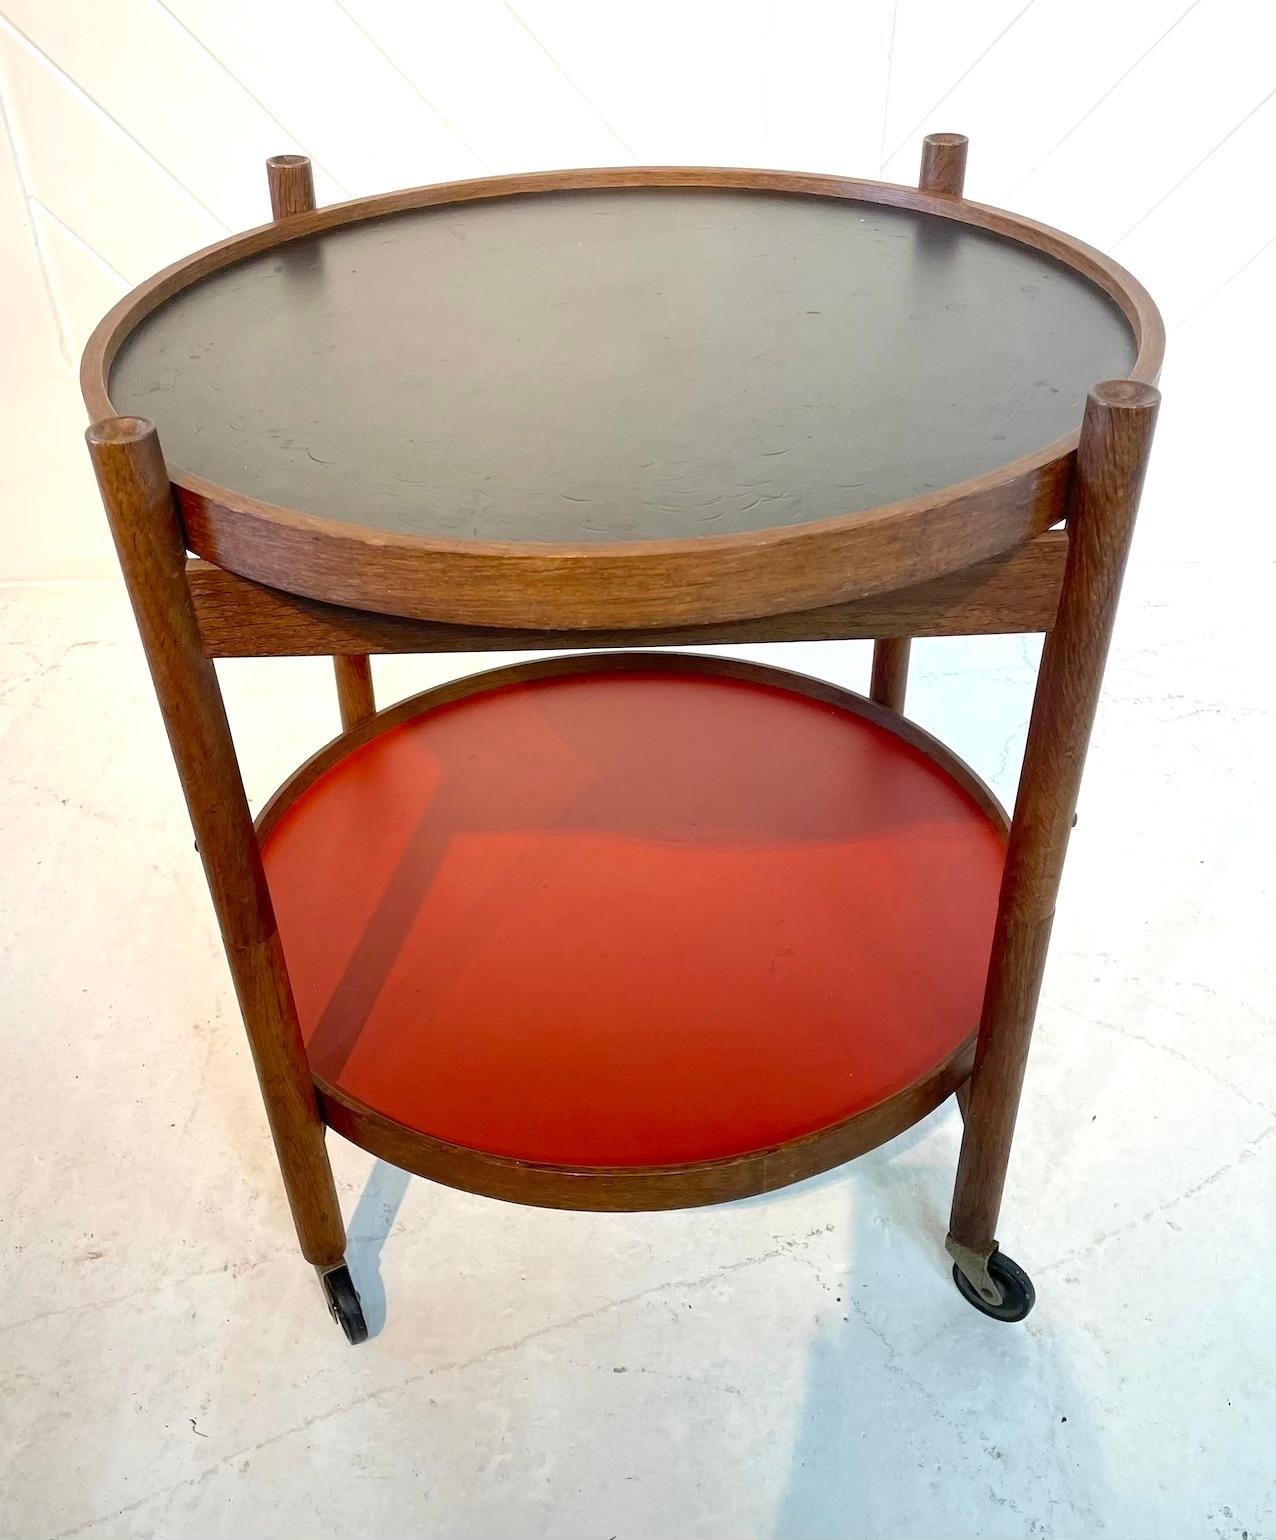 Danish oak folding trolly table on castors.
This table has reversible black and red lacquer trays, creating 4 different. colour ways
There is a makers stamp to the base.
Designed by Hans Bolling for Torben Orskov in 1963.